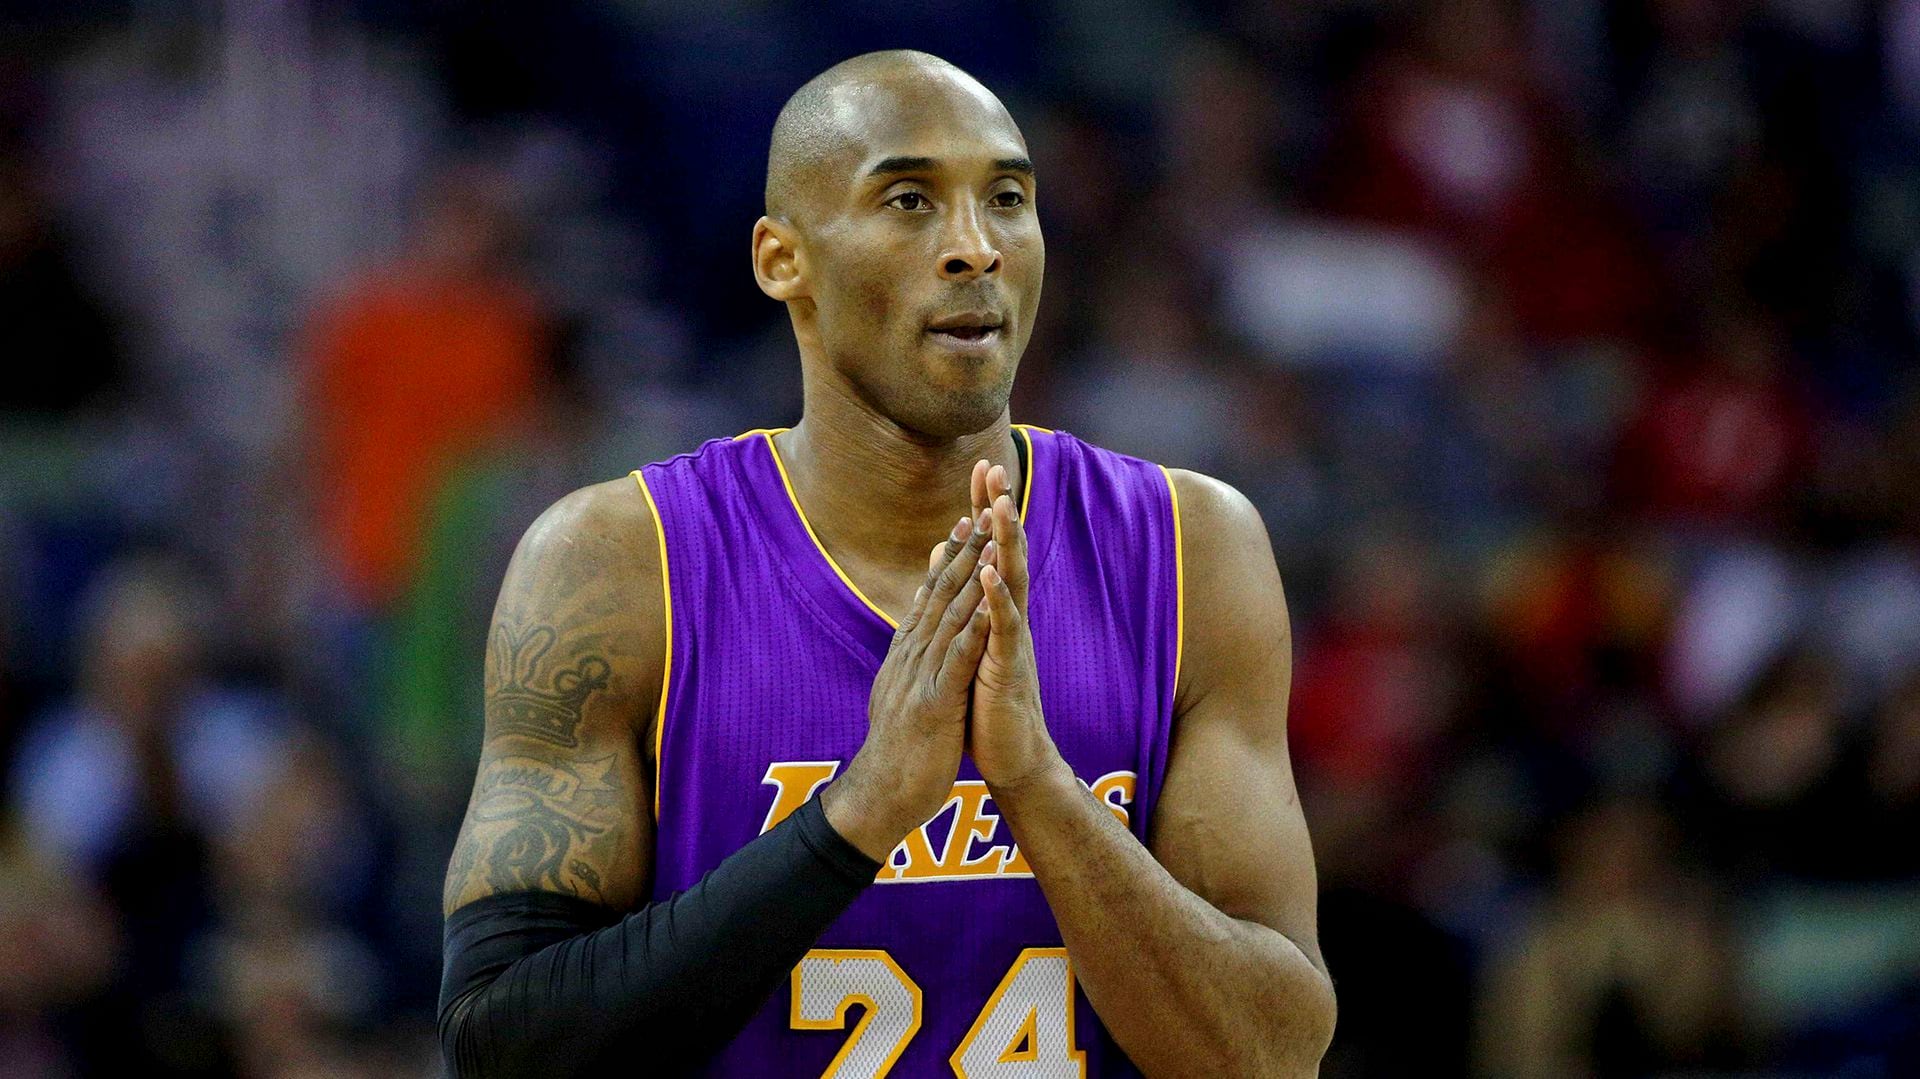 Kobe Bryant's epic career, told in numbers big and small